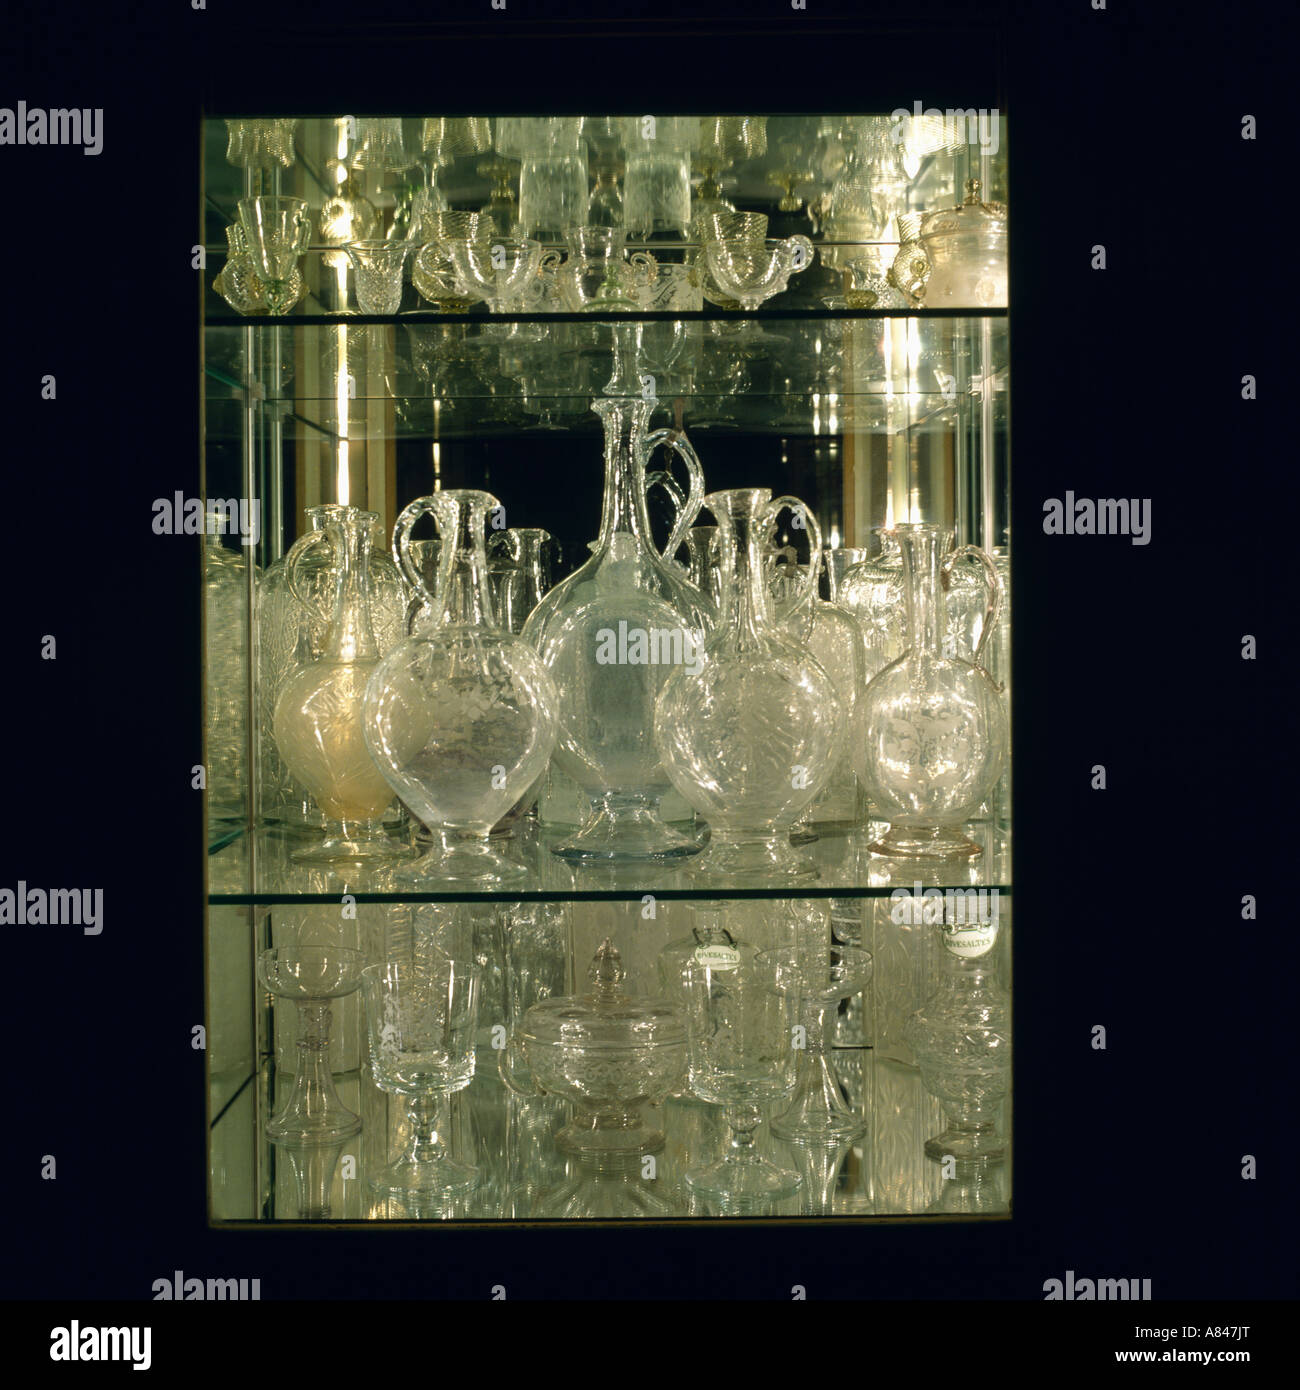 Collection of antique glass decanters on glass shelves Stock Photo